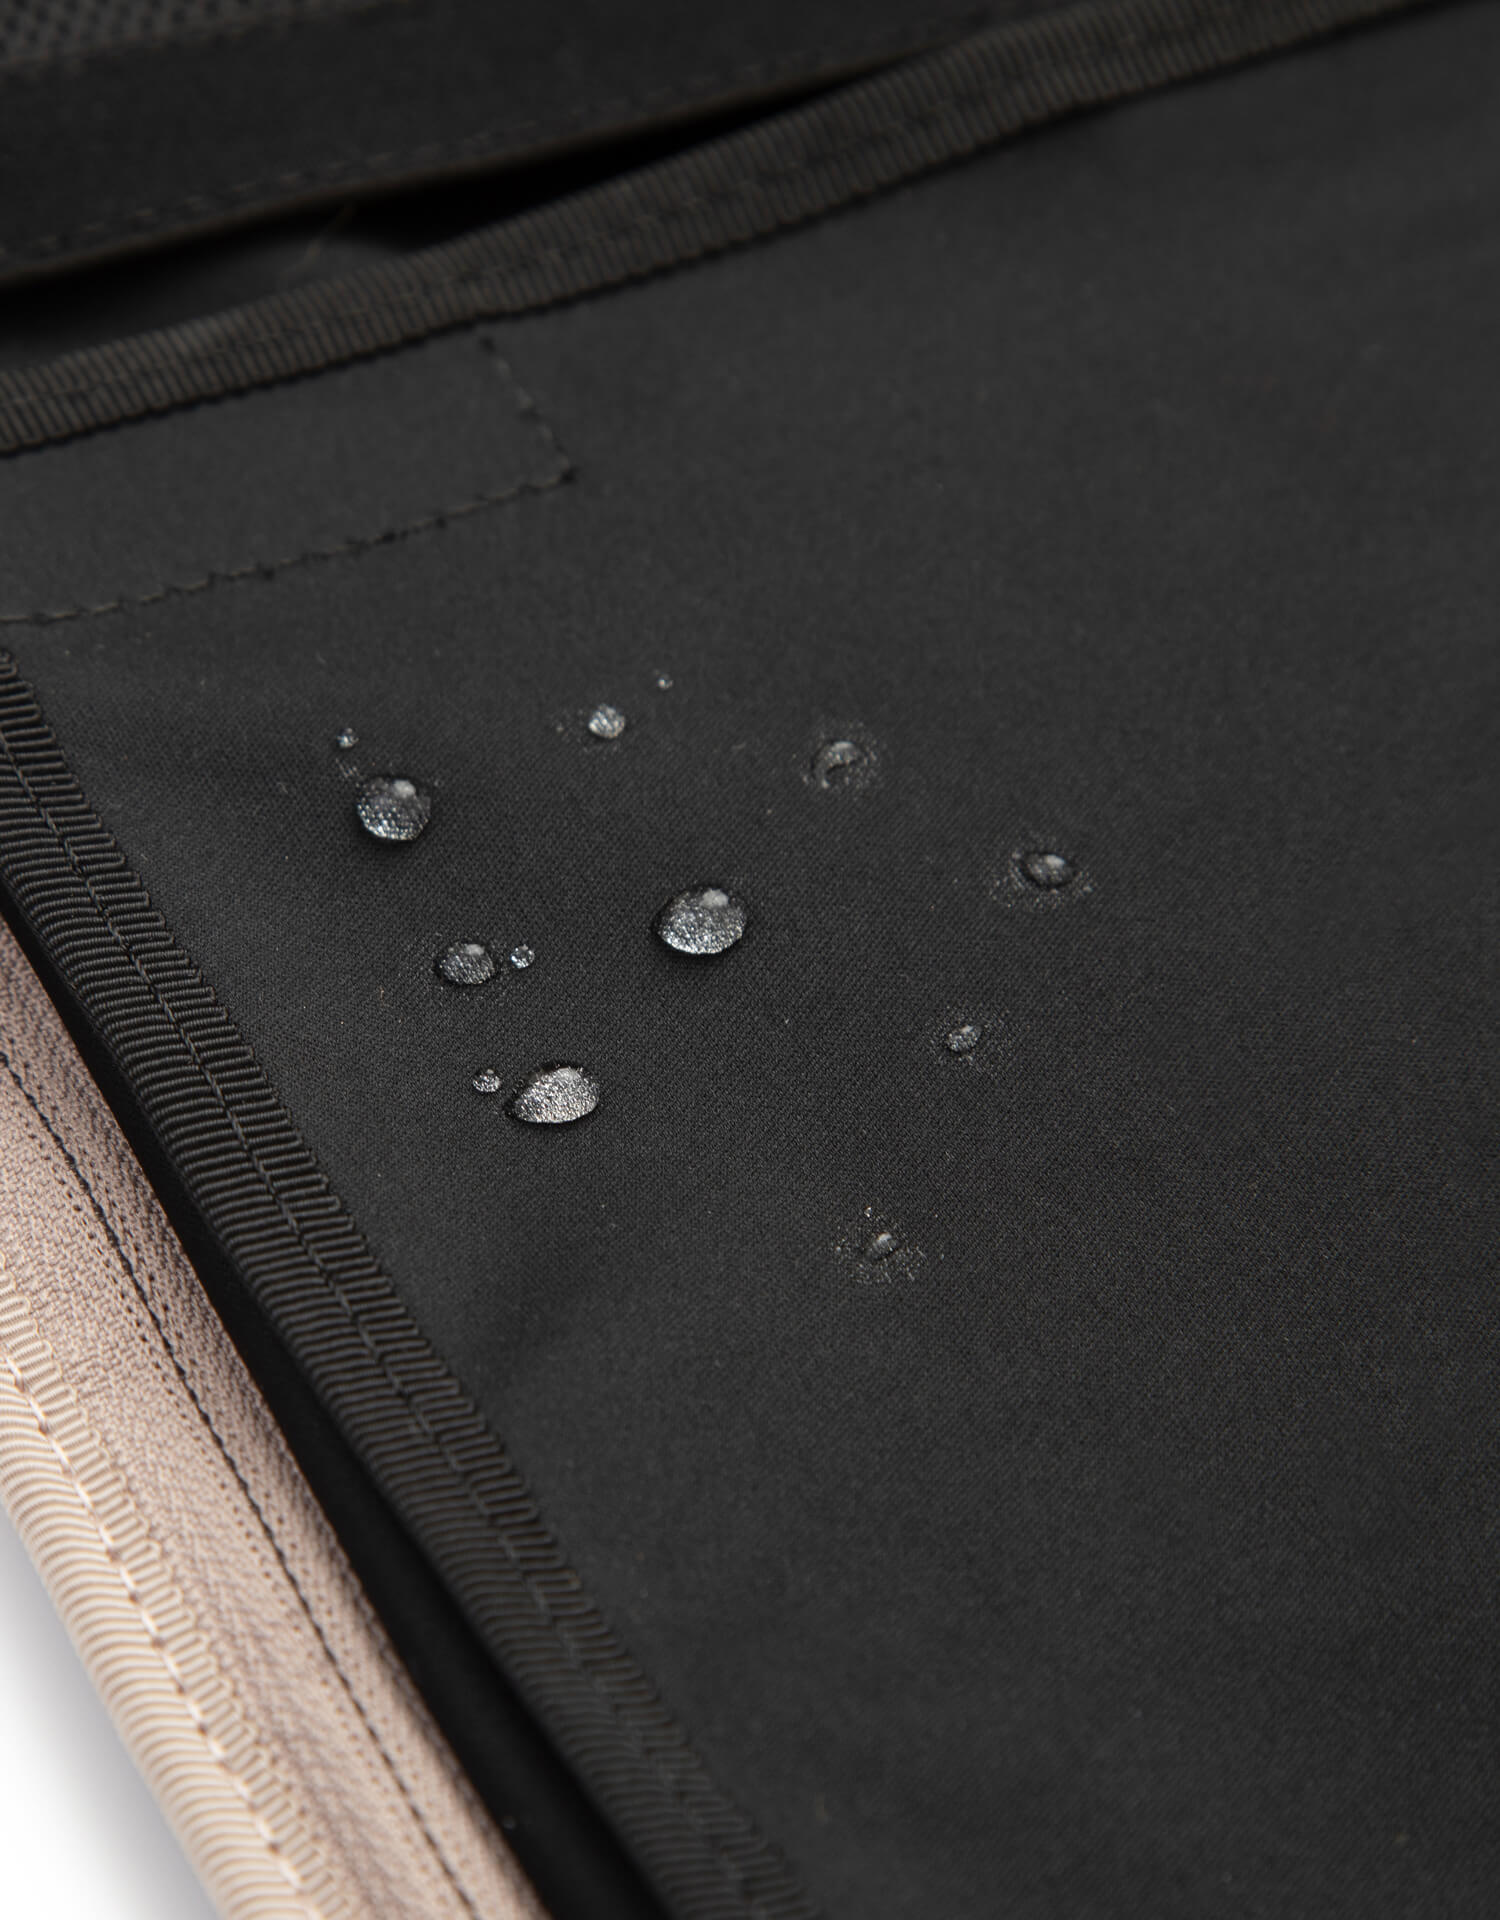 Diaper bag open with water droplets to show the inner is water repellent